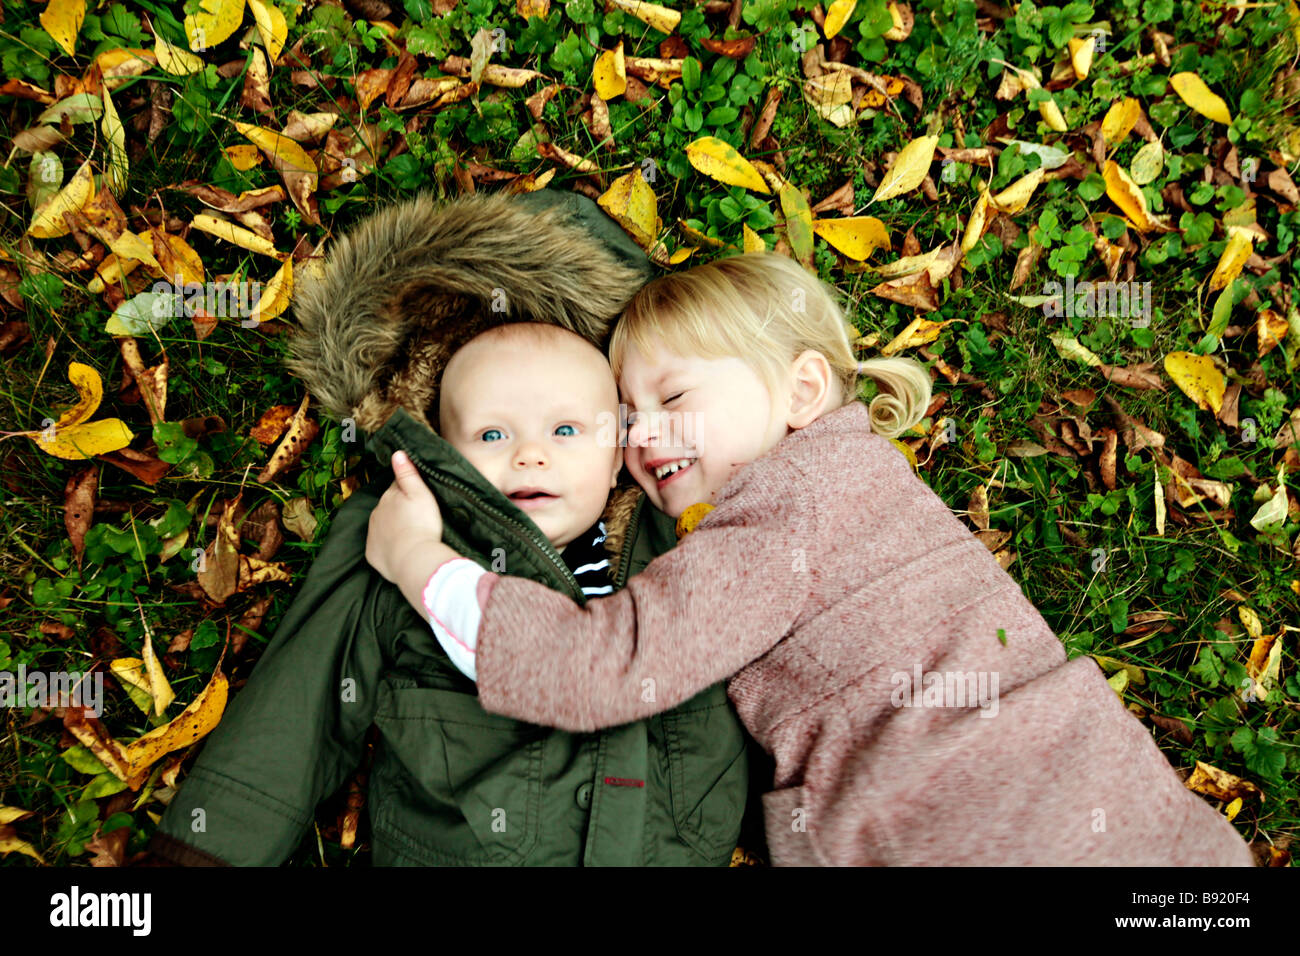 A sister with her baby brother Sweden. Stock Photo